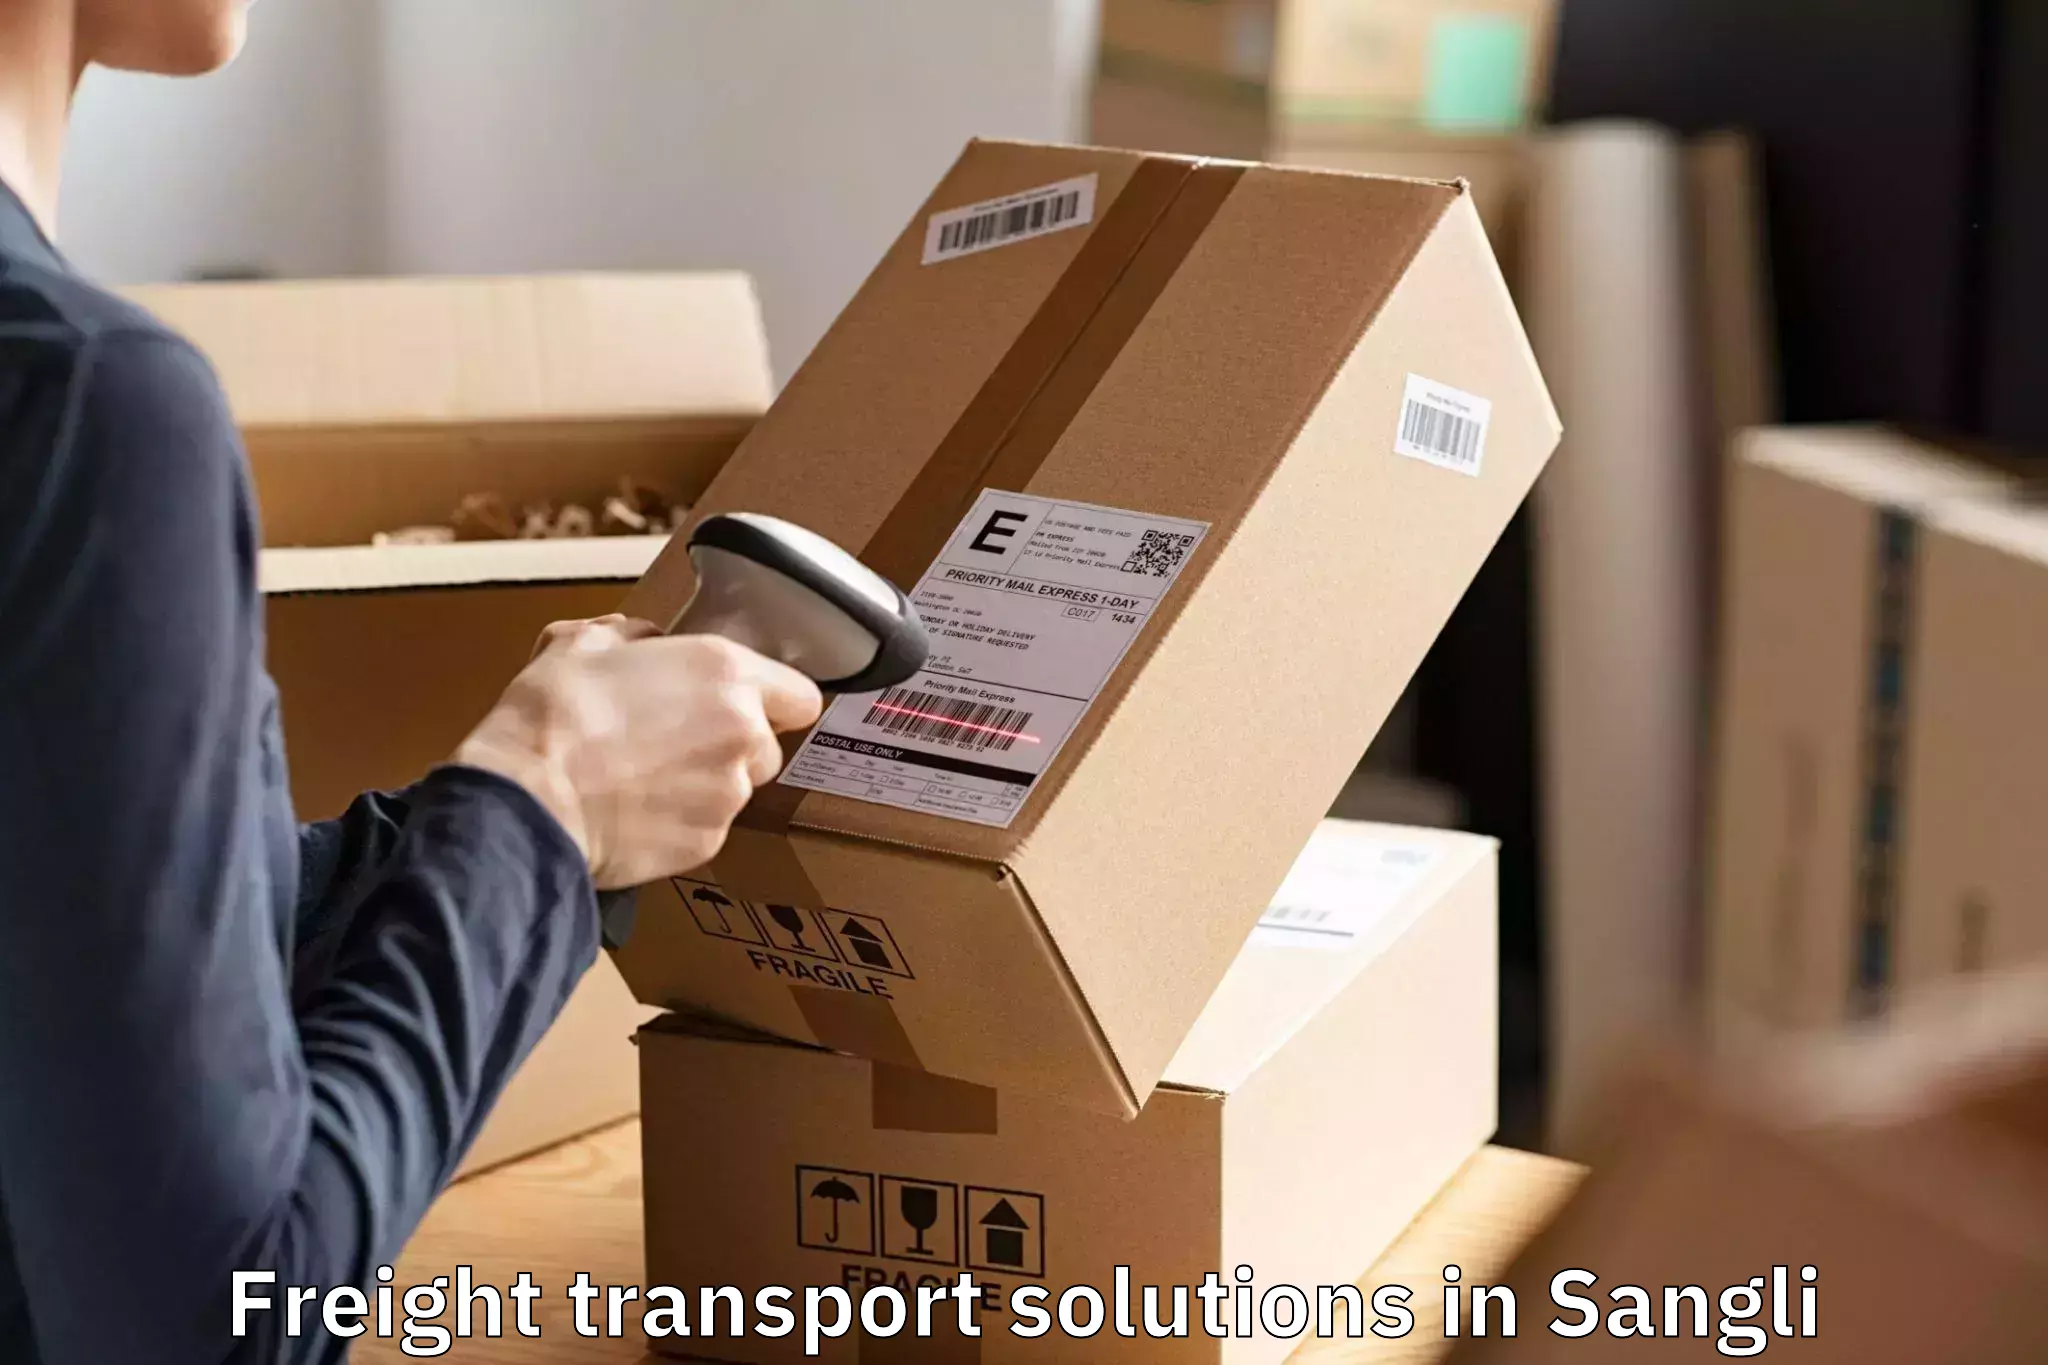 Get Freight Transport Solutions in Sangli, Maharashtra (MH)